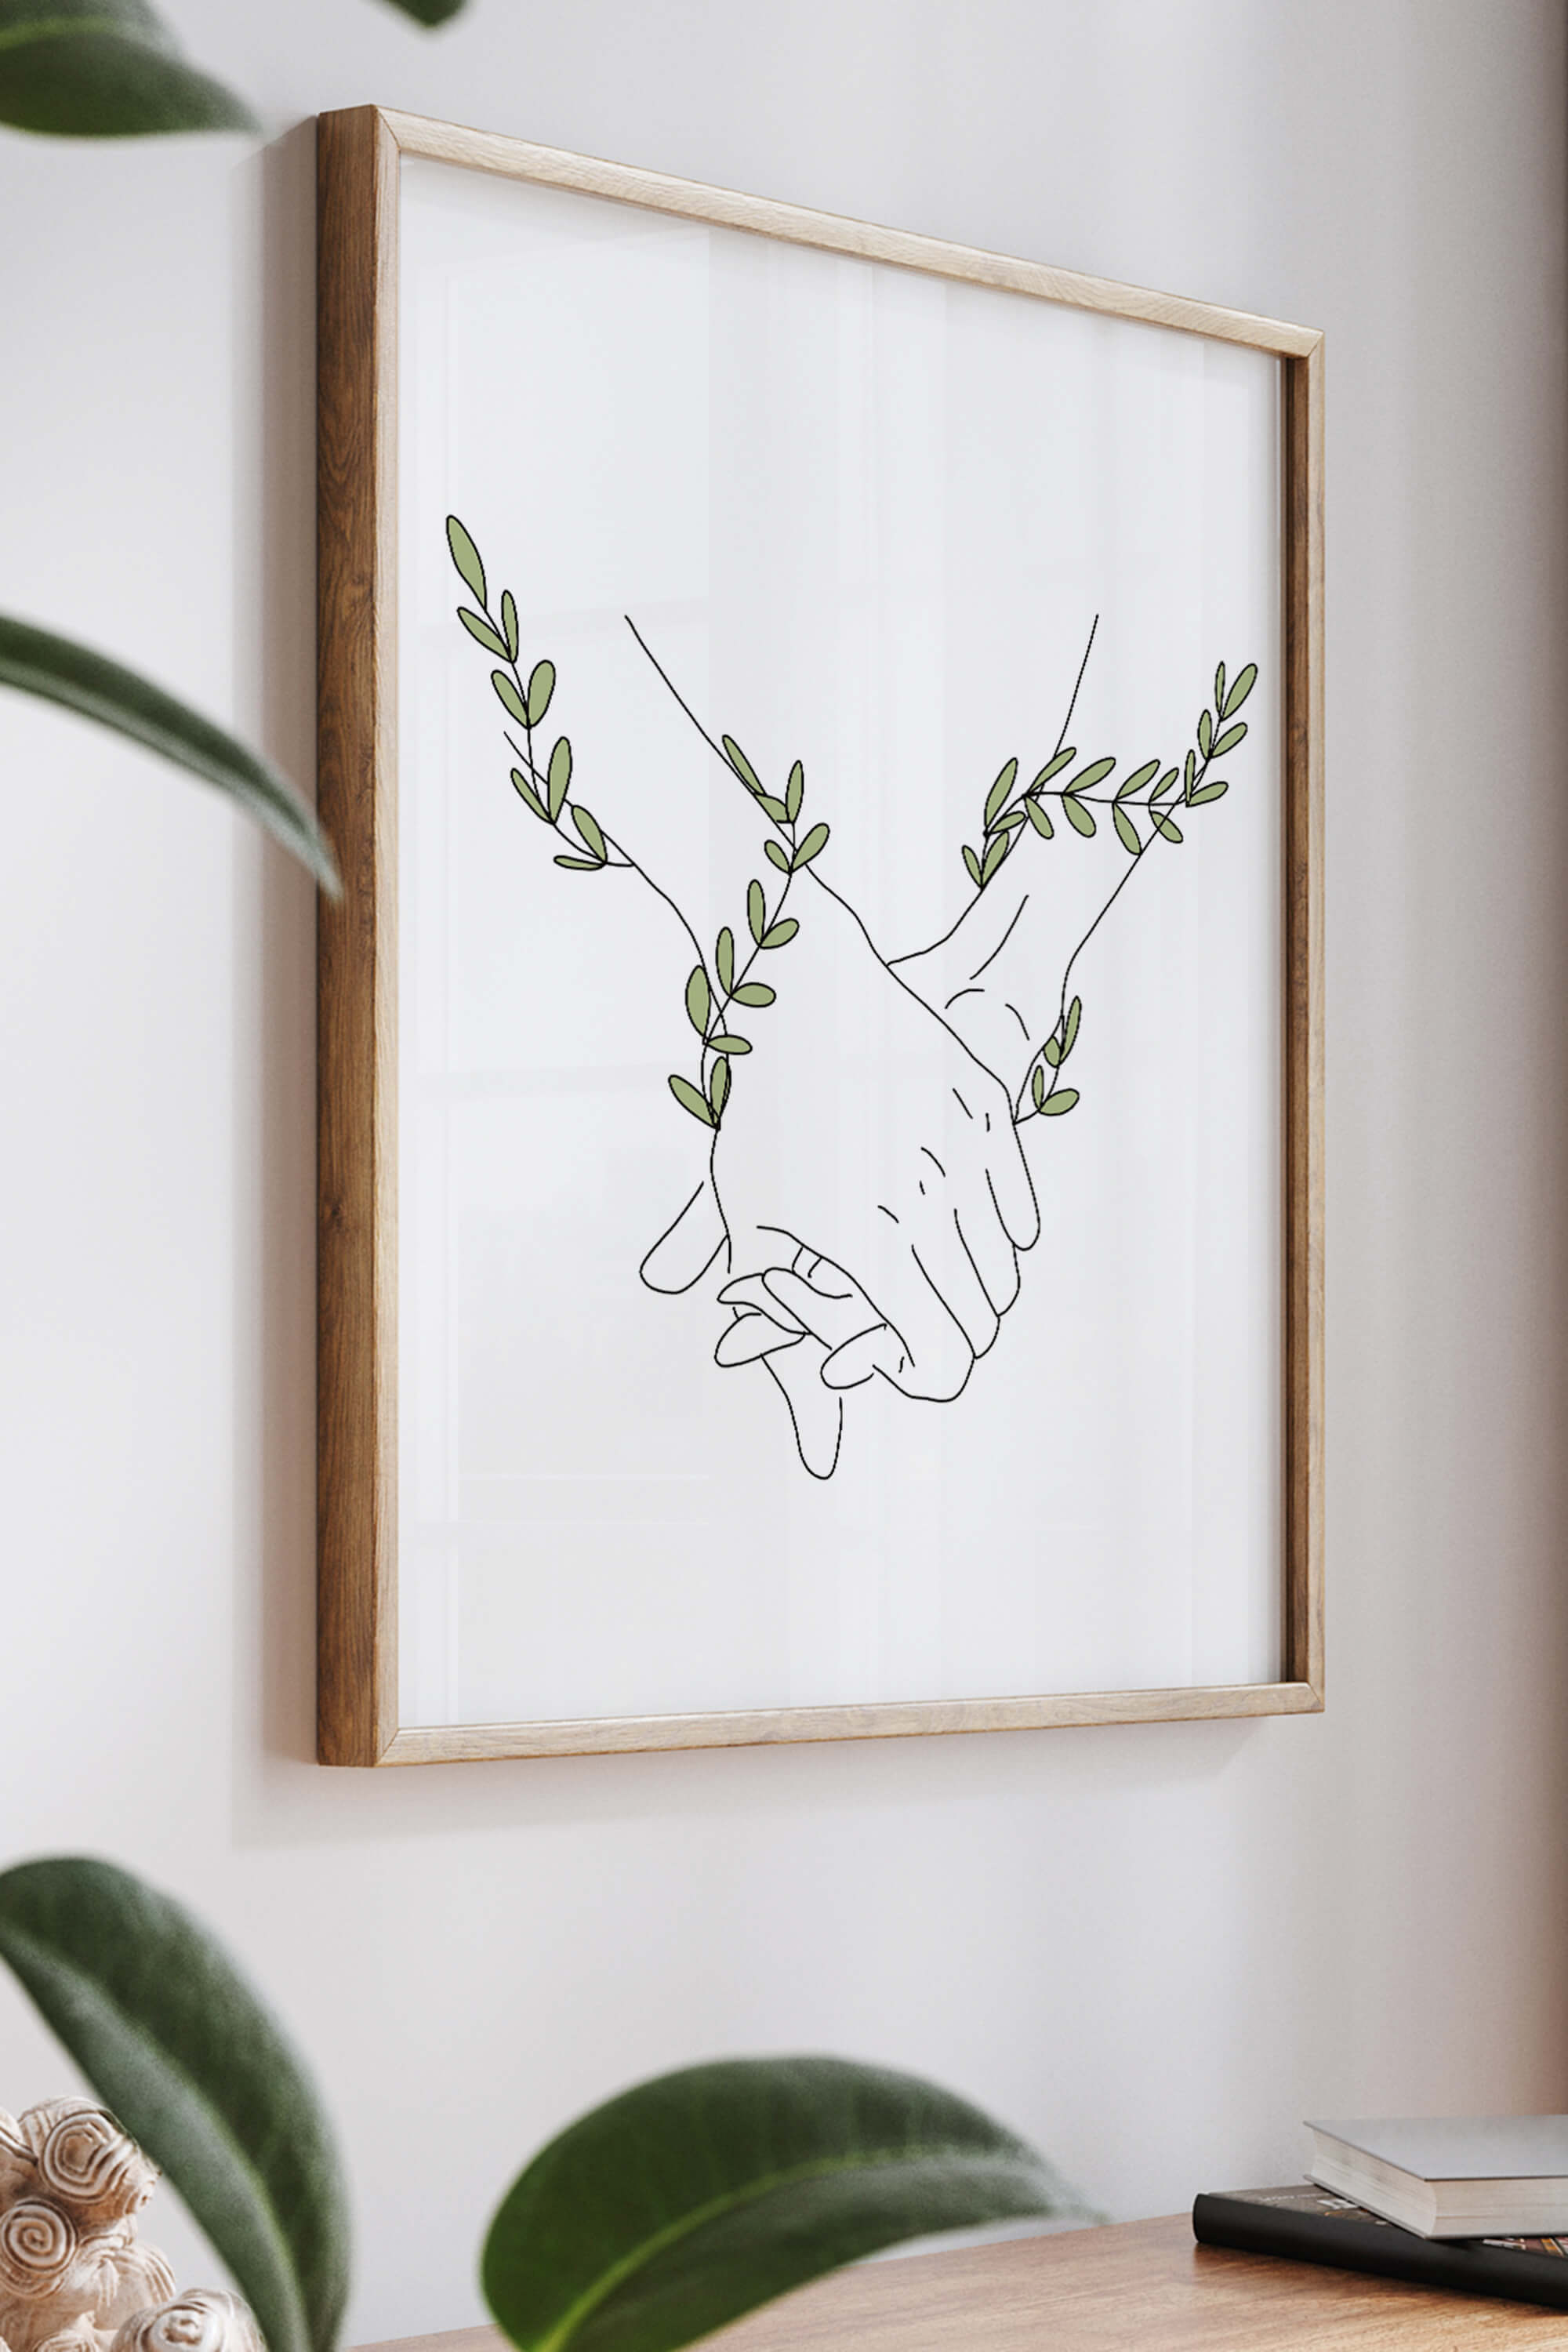 A minimalist art print that embodies love and adds a touch of romance to your decor.